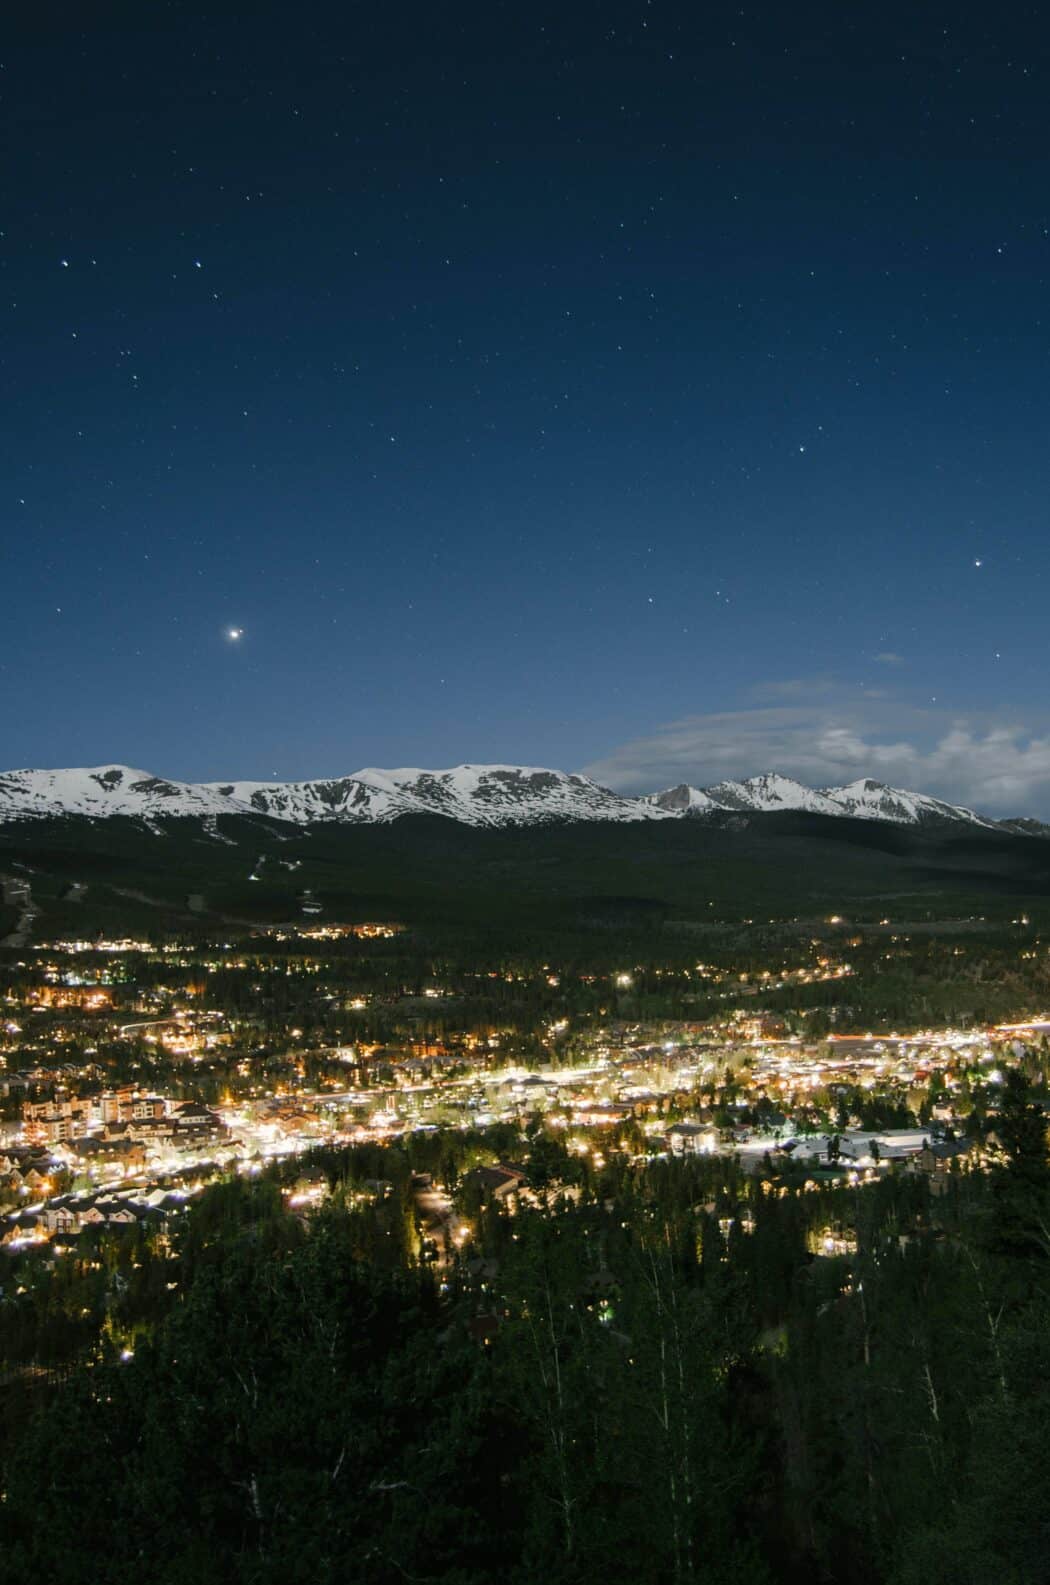 Overlooking Breckenridge Colorado. Night sky showing mountains and city lights